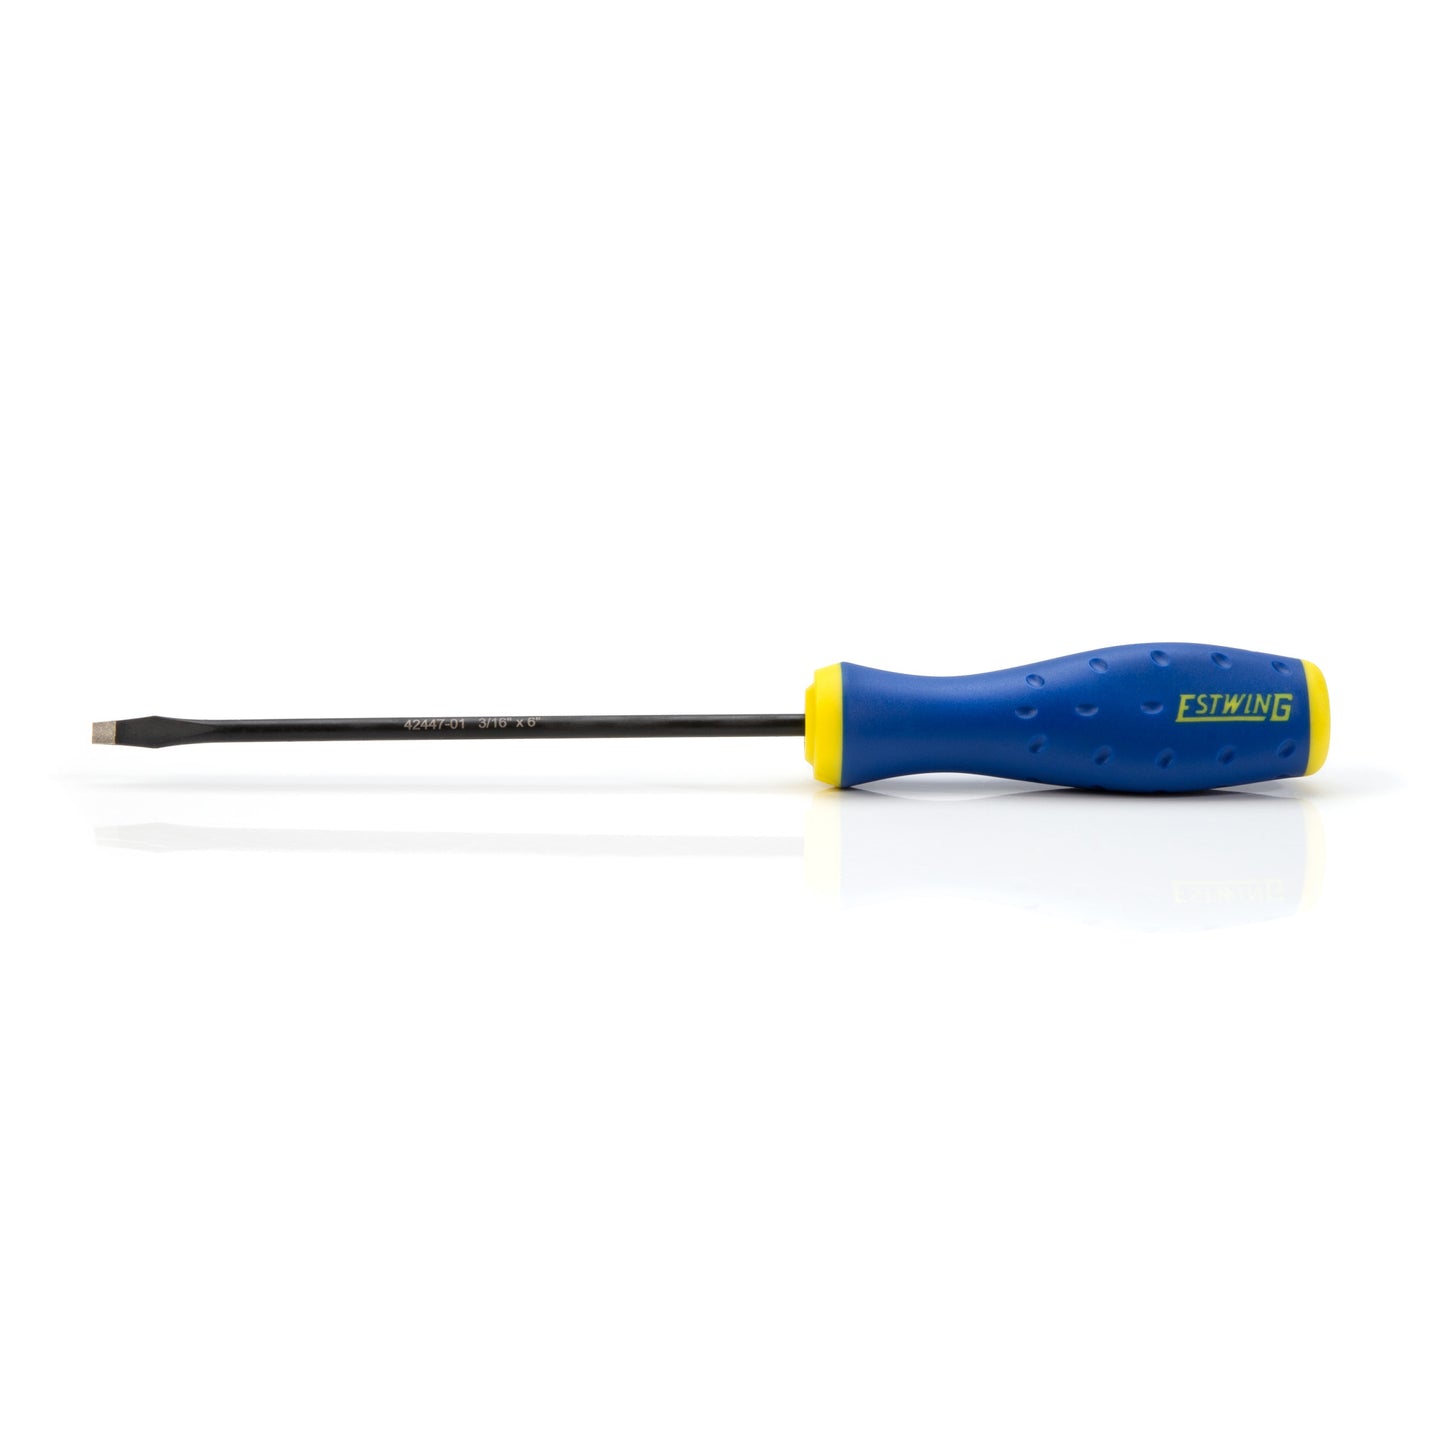 3/16-Inch x 6-Inch Slotted Magnetic Diamond Tip Screwdriver with Ergonomic Handle